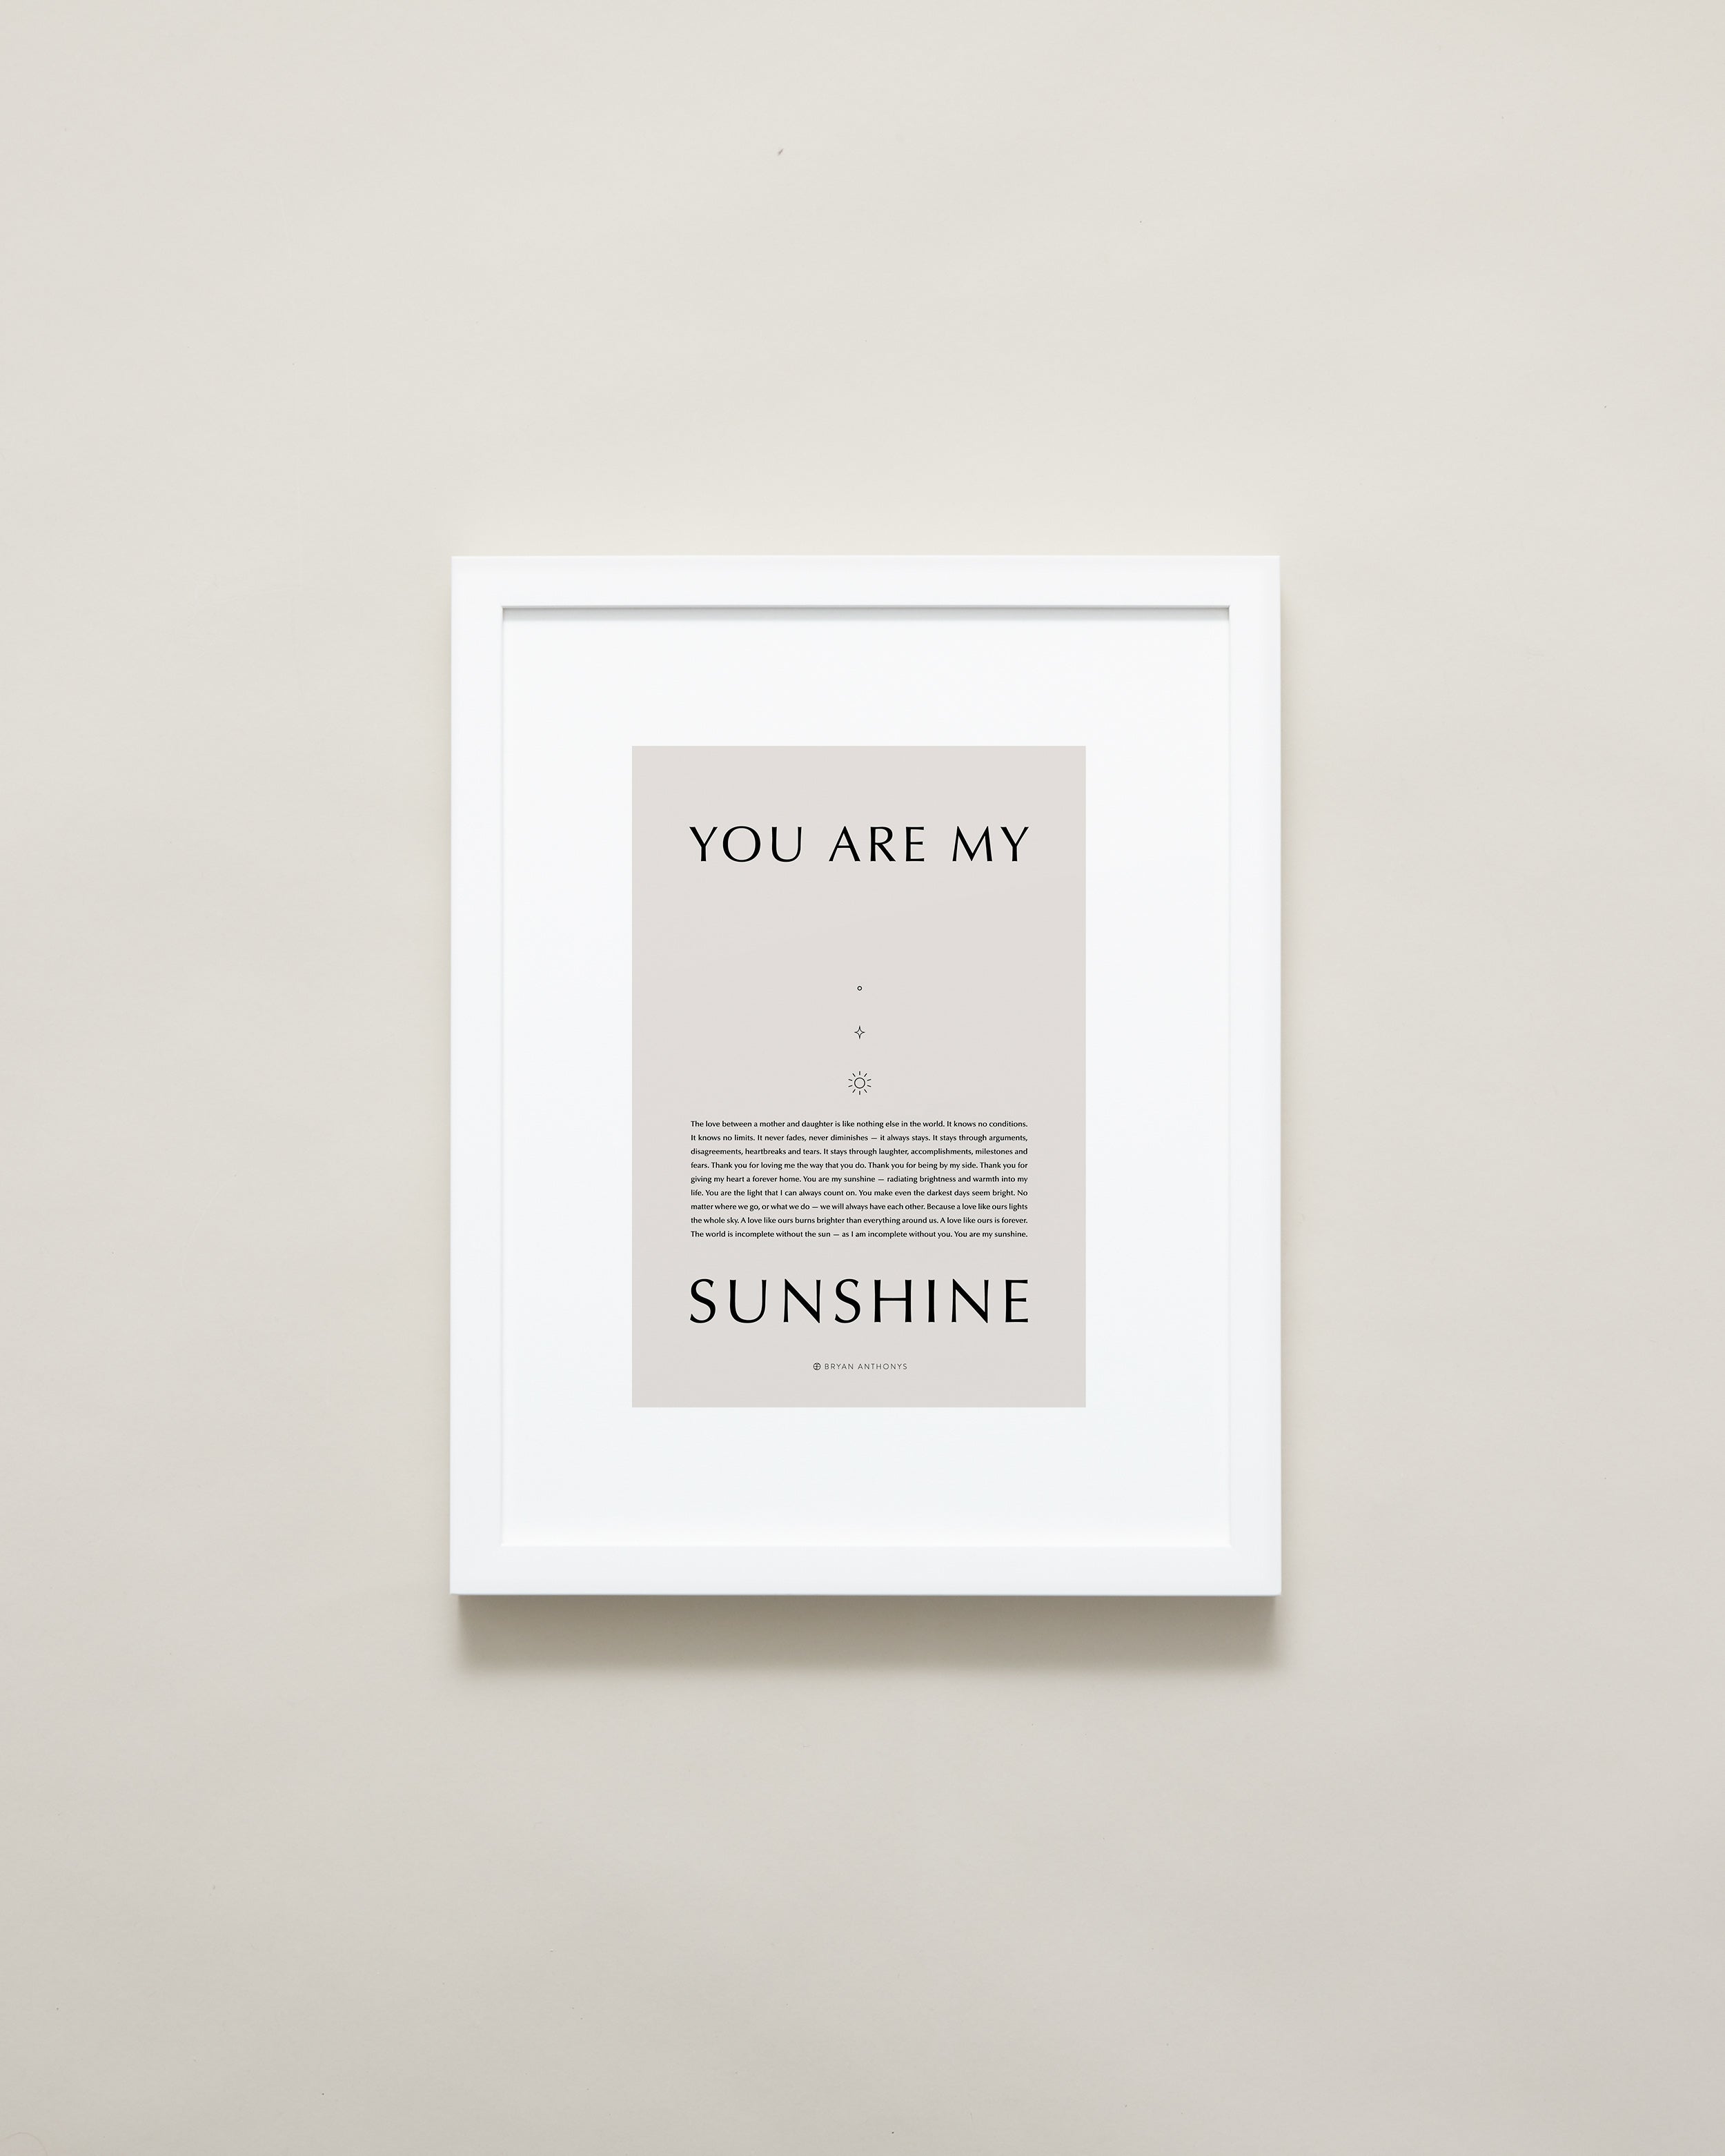 Bryan Anthonys Home Decor Purposeful Prints You Are My Sunshine Iconic Framed Print Tan Art With White Frame 11x14